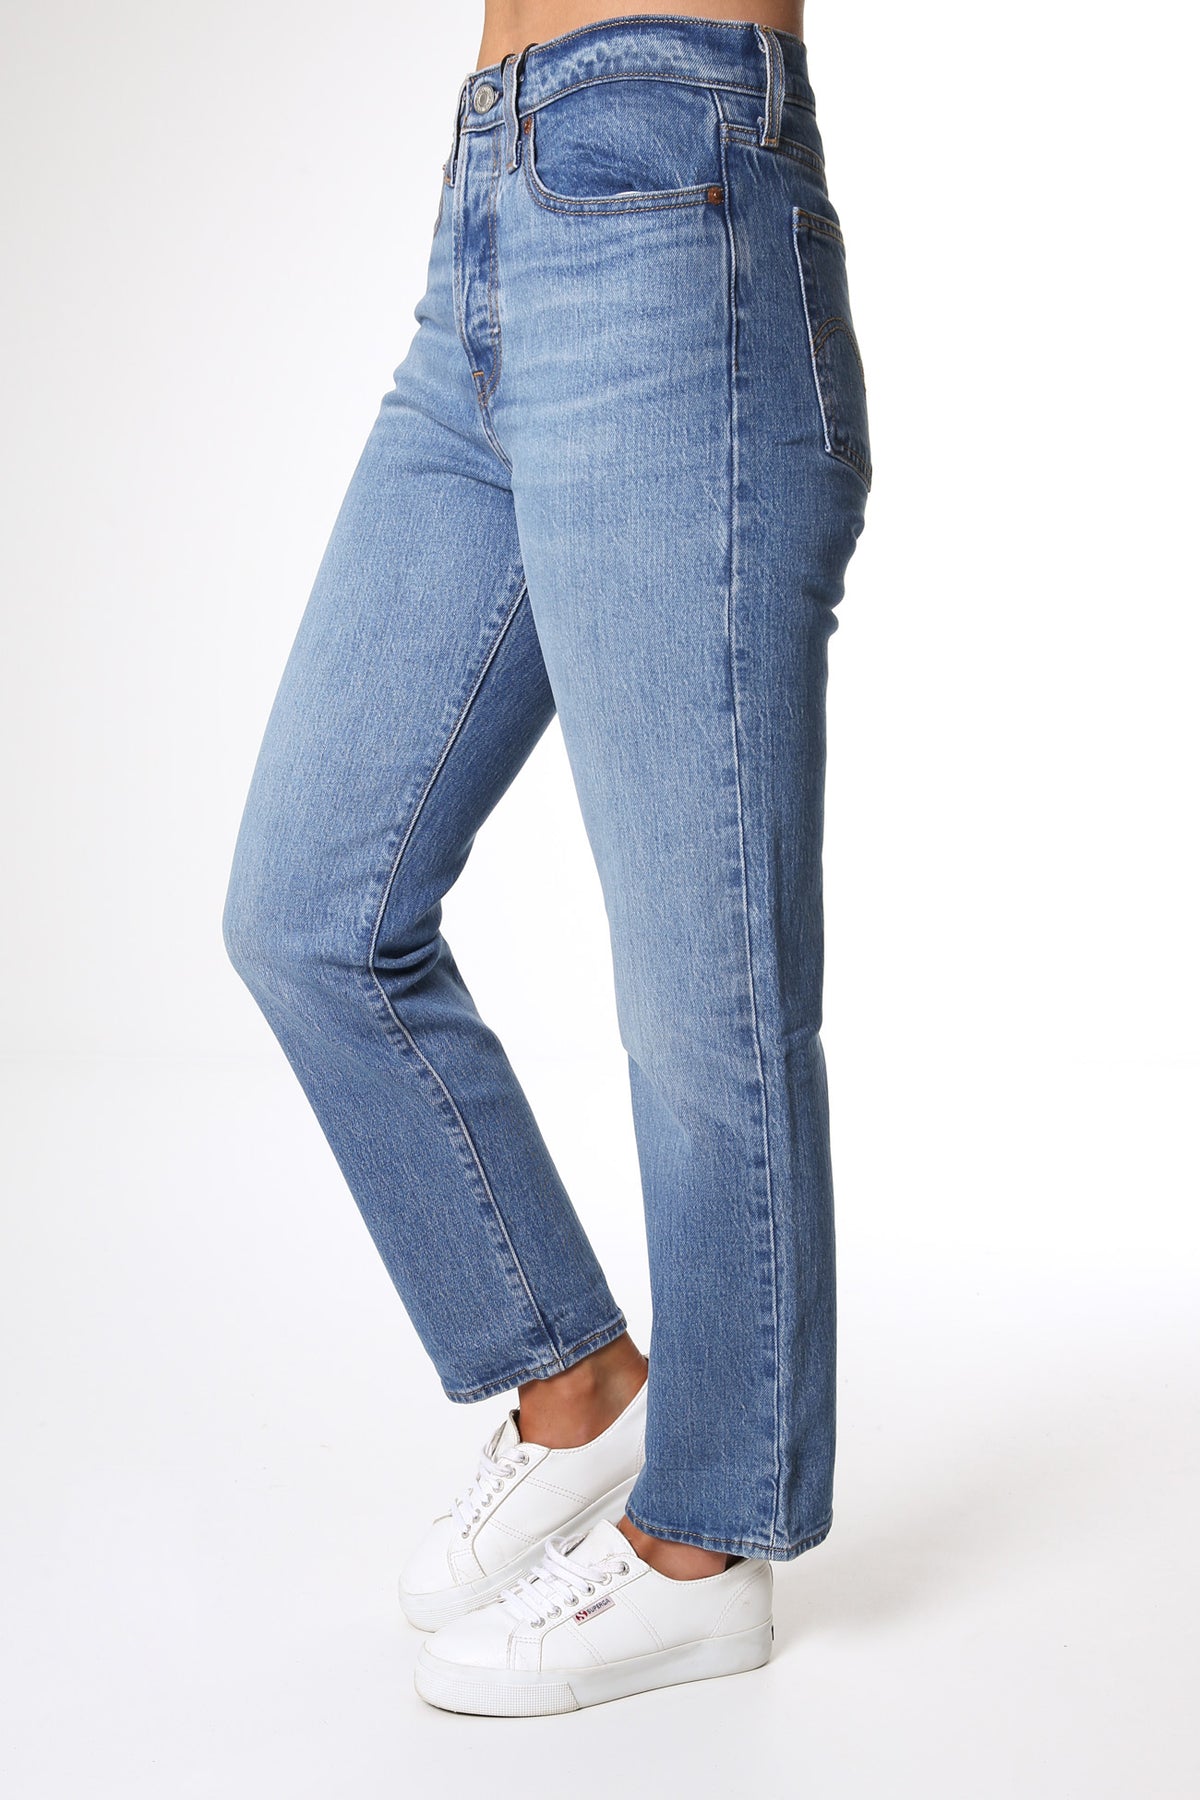 Levi's - Wedgie Fit Straight Jeans in Jive Sound – gravitypope